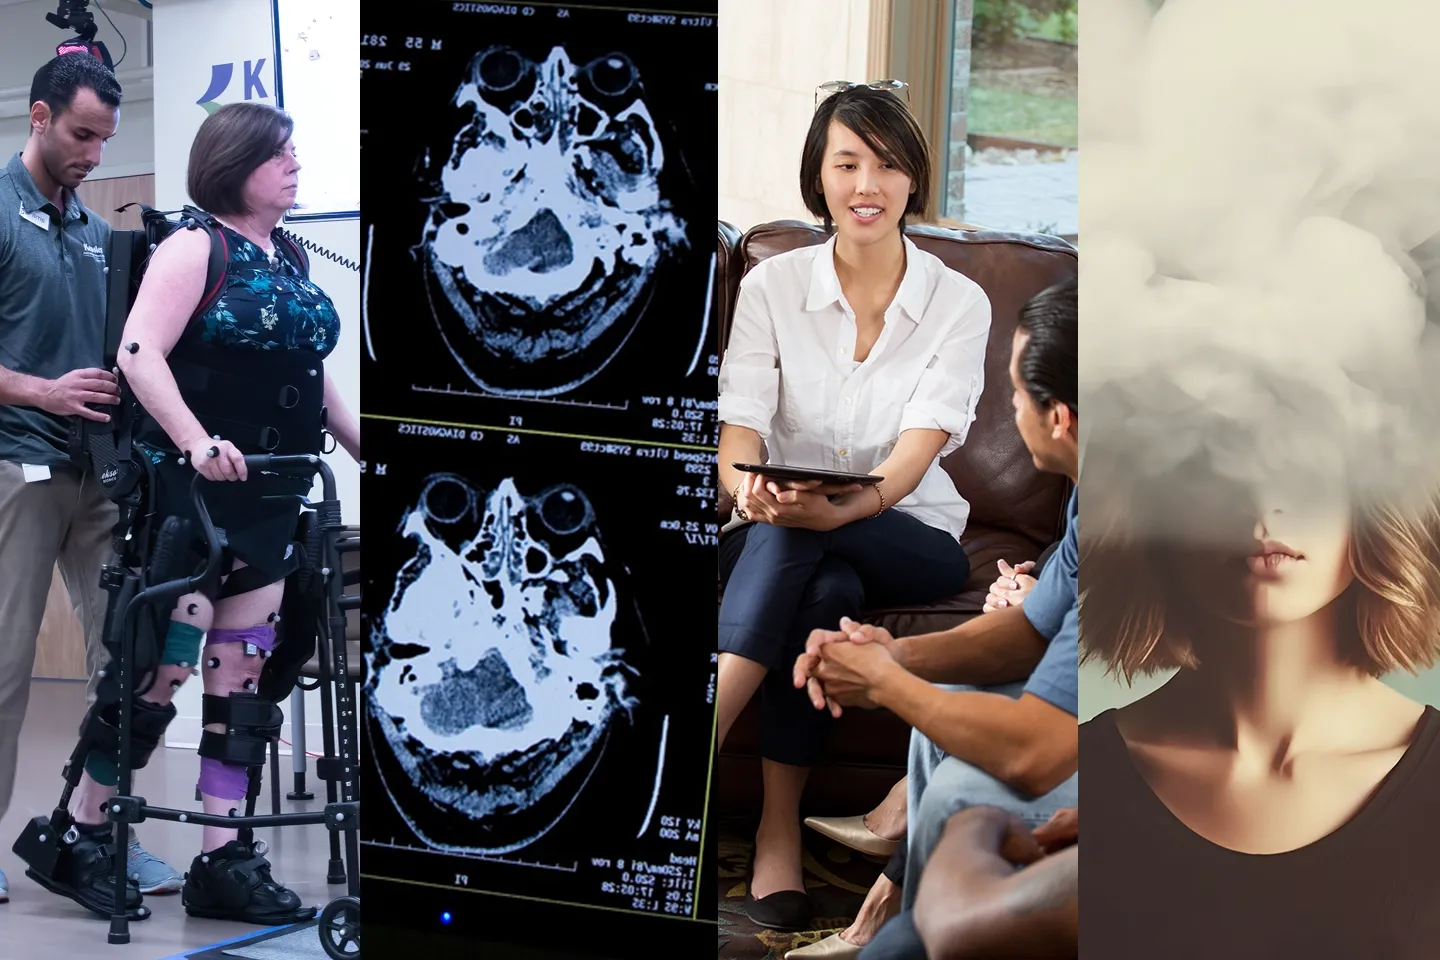 Collage of photos, physical therapist guiding a woman participant in an exoskeleton, MRI scan of the brain, woman sitting in a group setting, Young woman with her whole head in cloud.